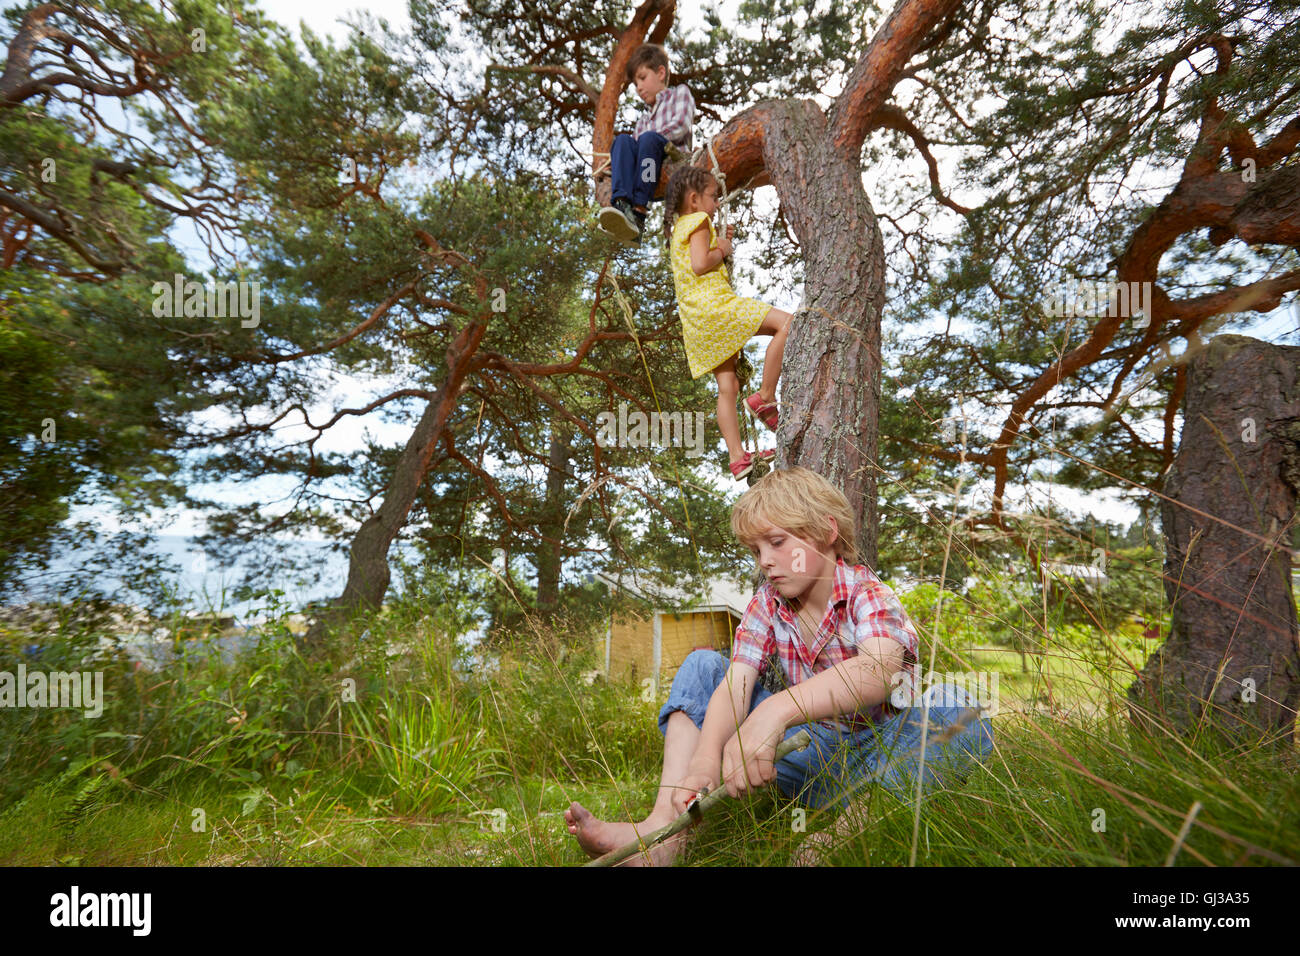 Young boy sitting in tree, young girl climbing rope ladder on tree and boy sitting in grass Stock Photo